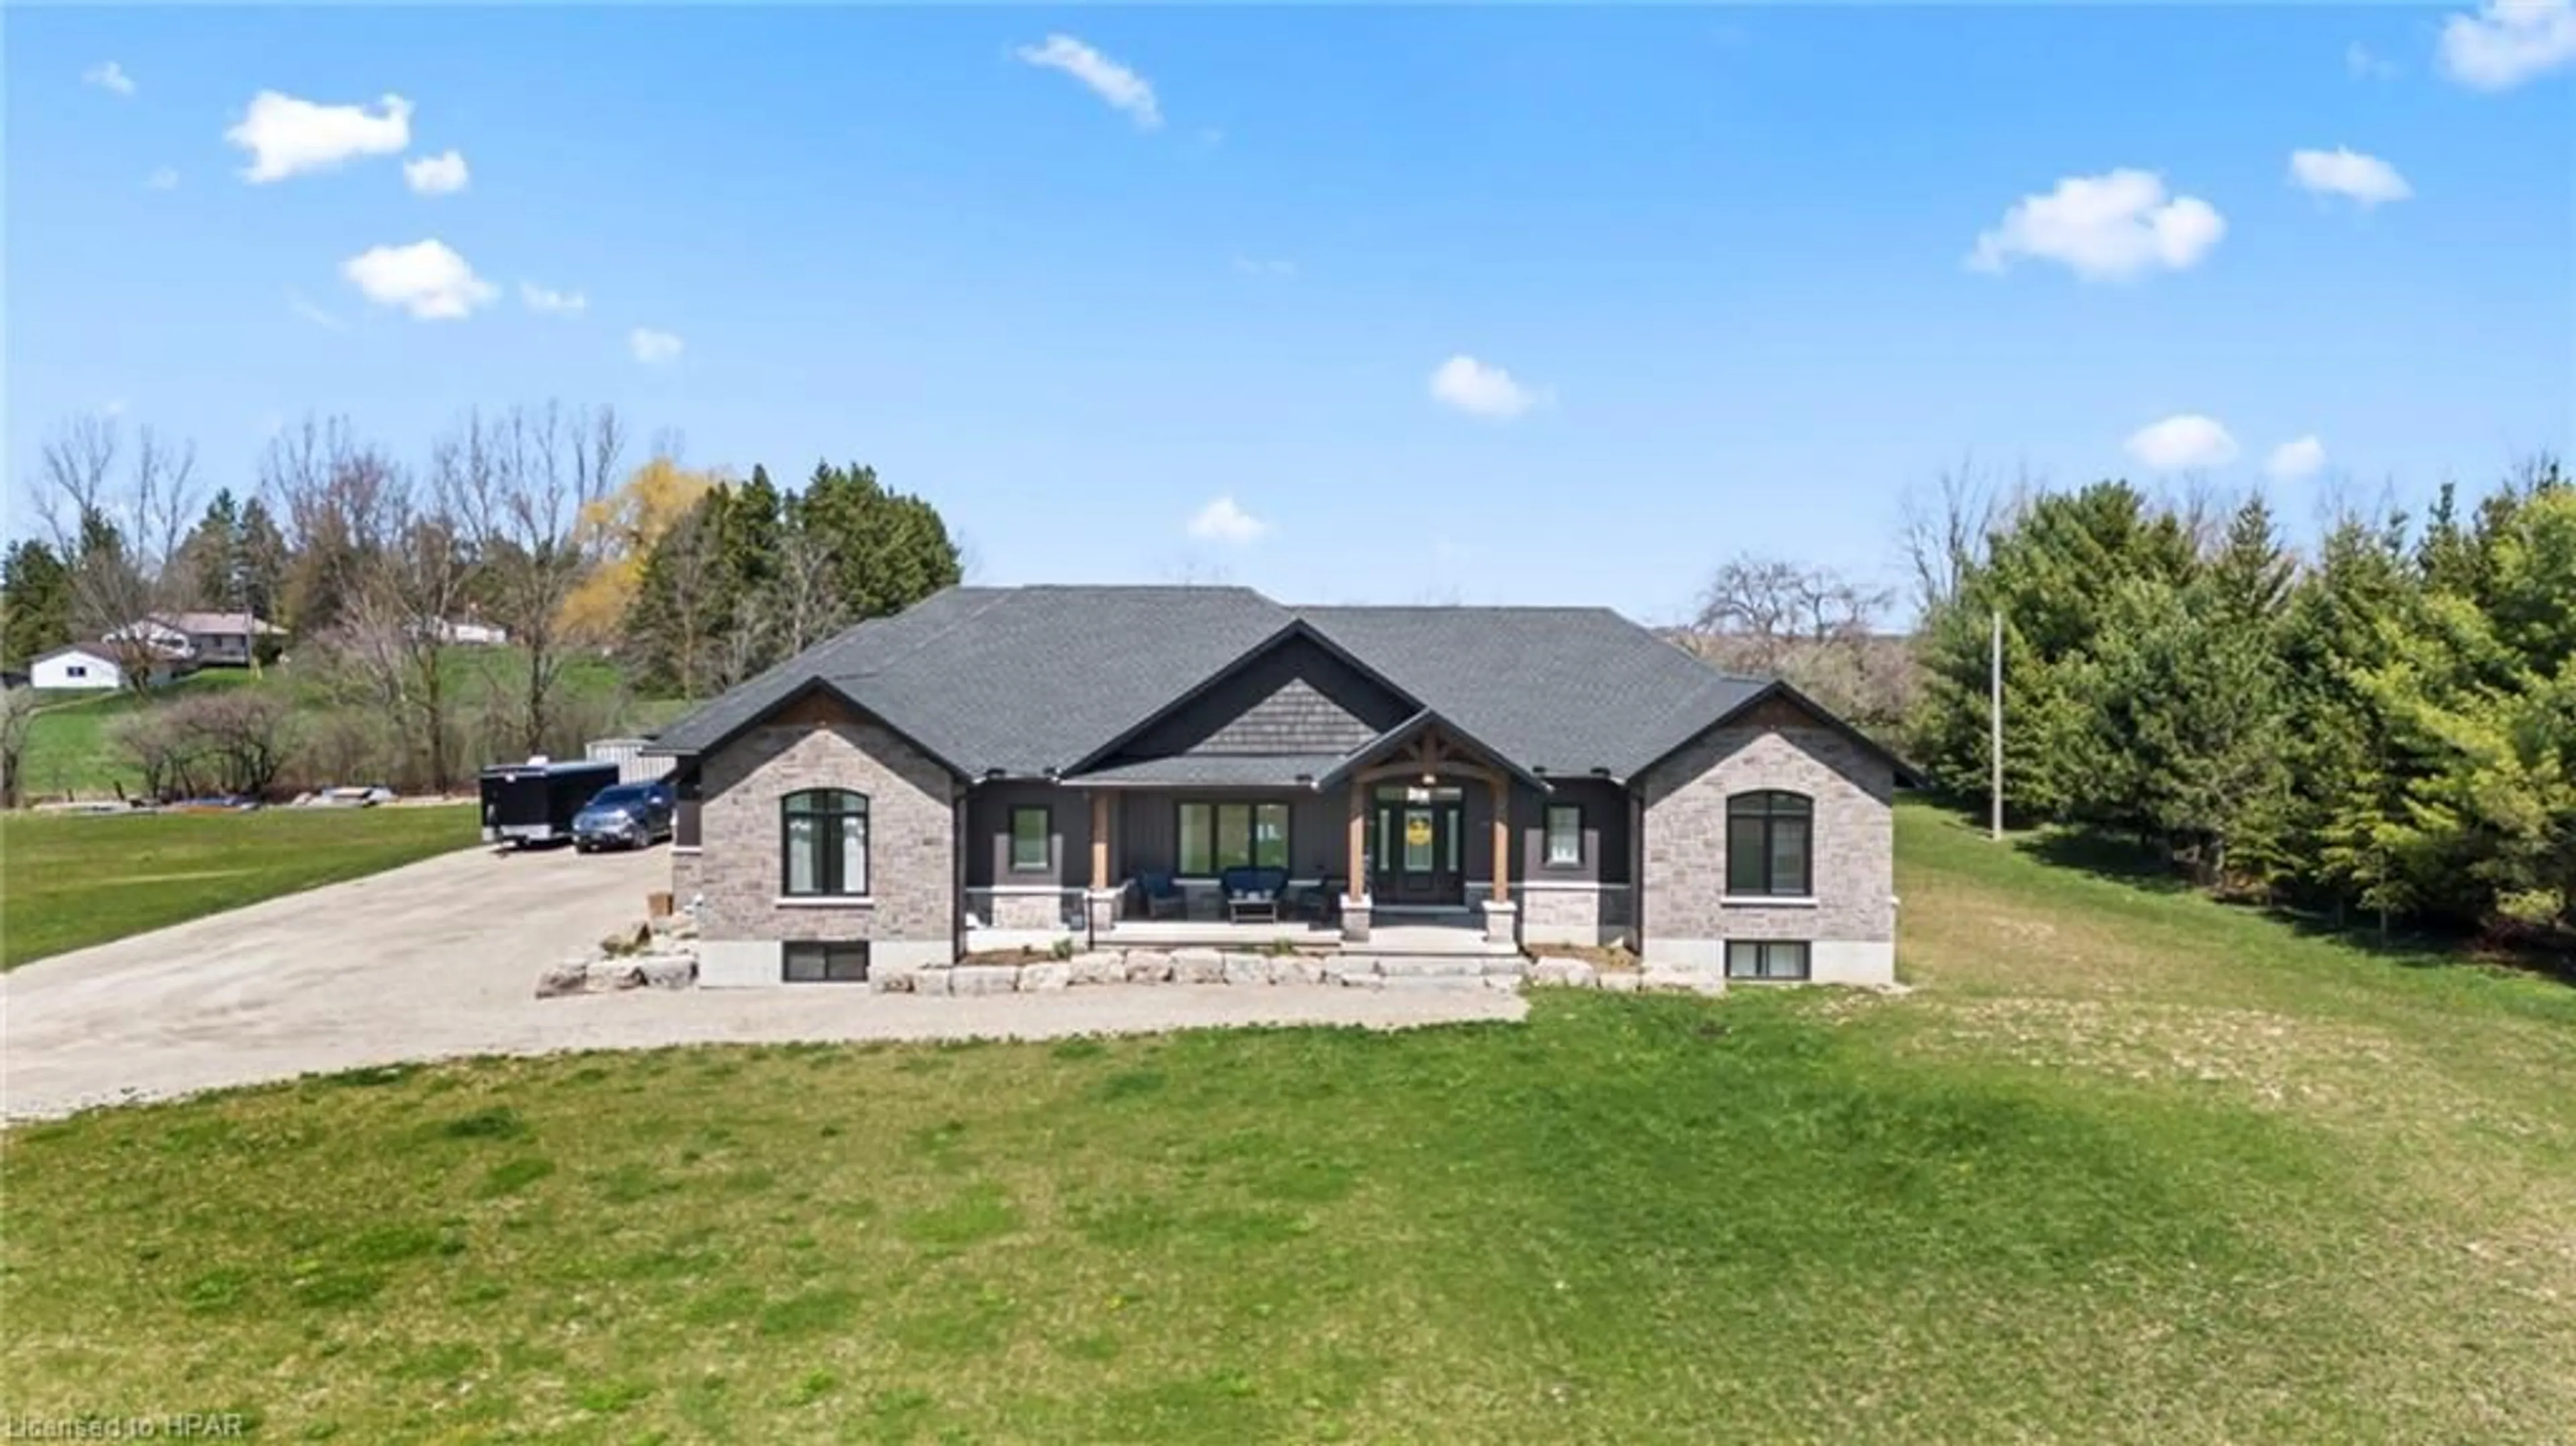 Frontside or backside of a home for 51 Highland Rd, Minto Ontario N0G 1M0